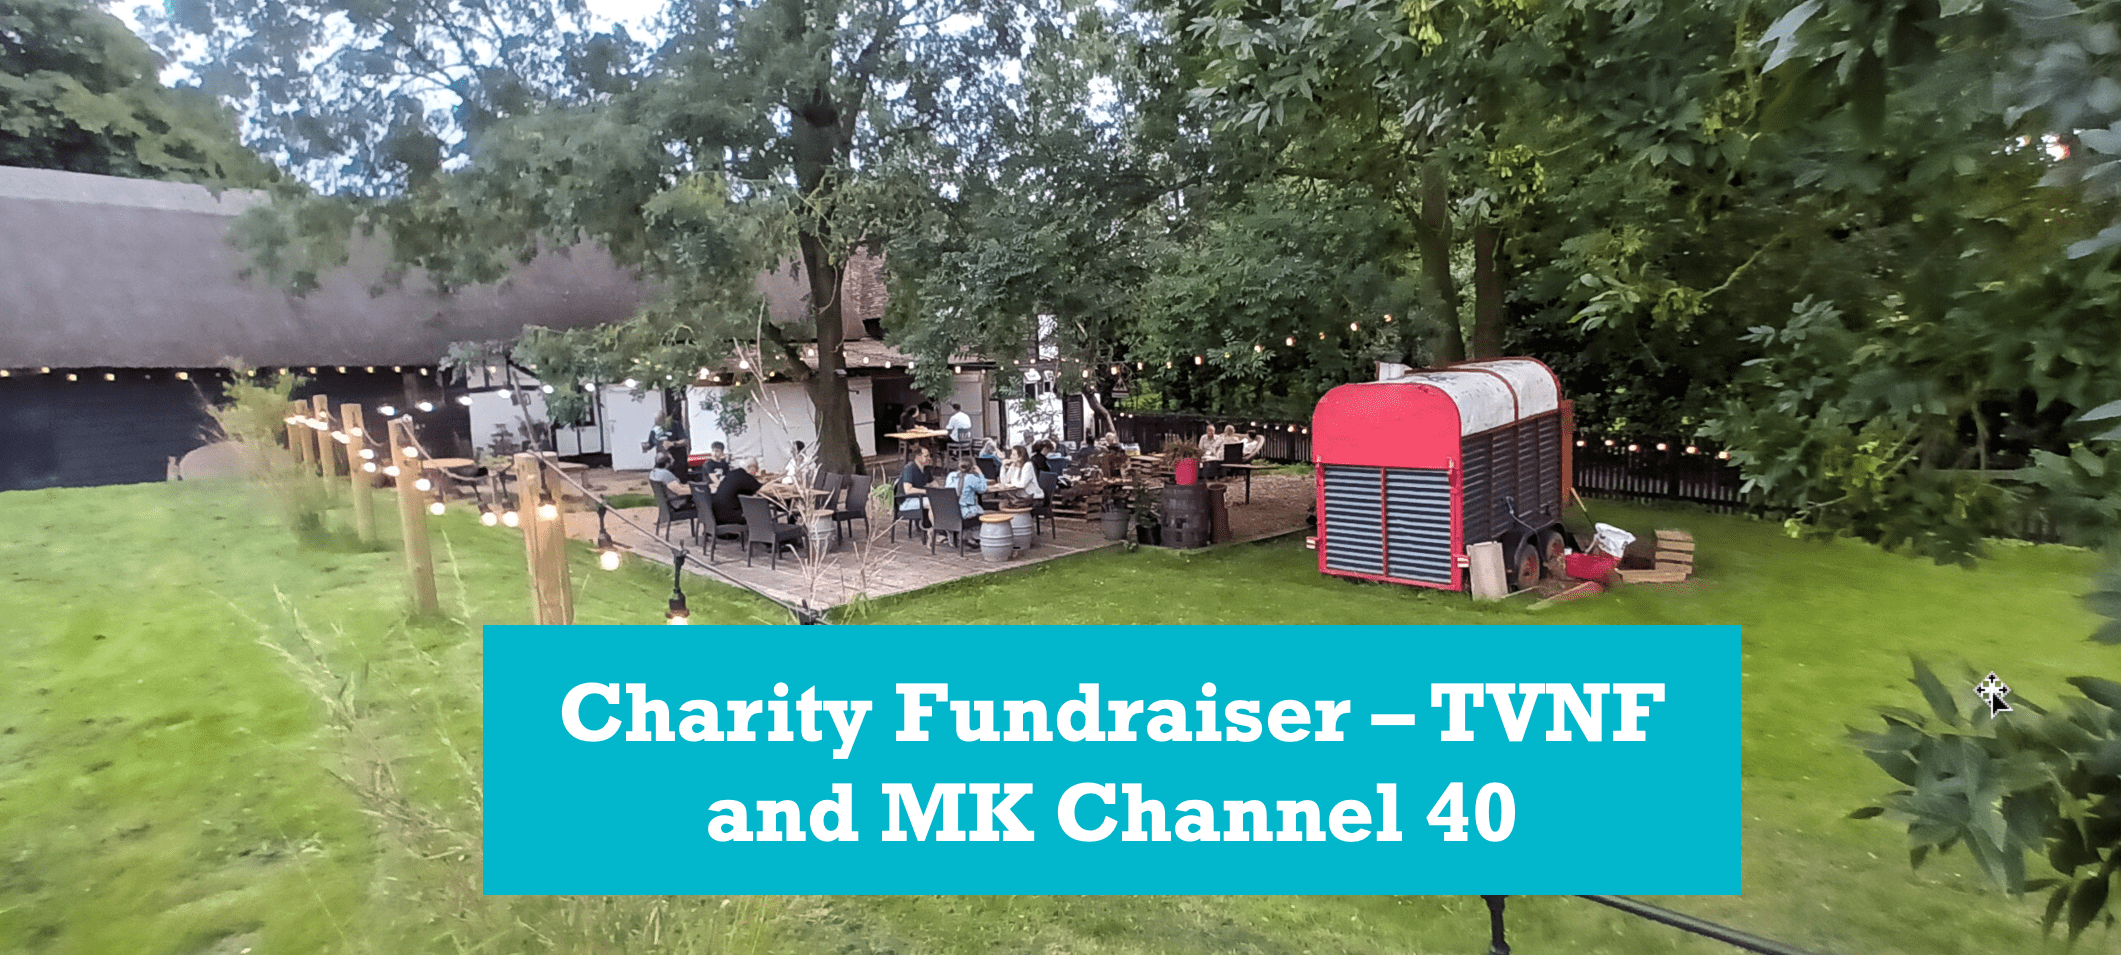 Charity Fundraiser - TVNF & MK Channel 40